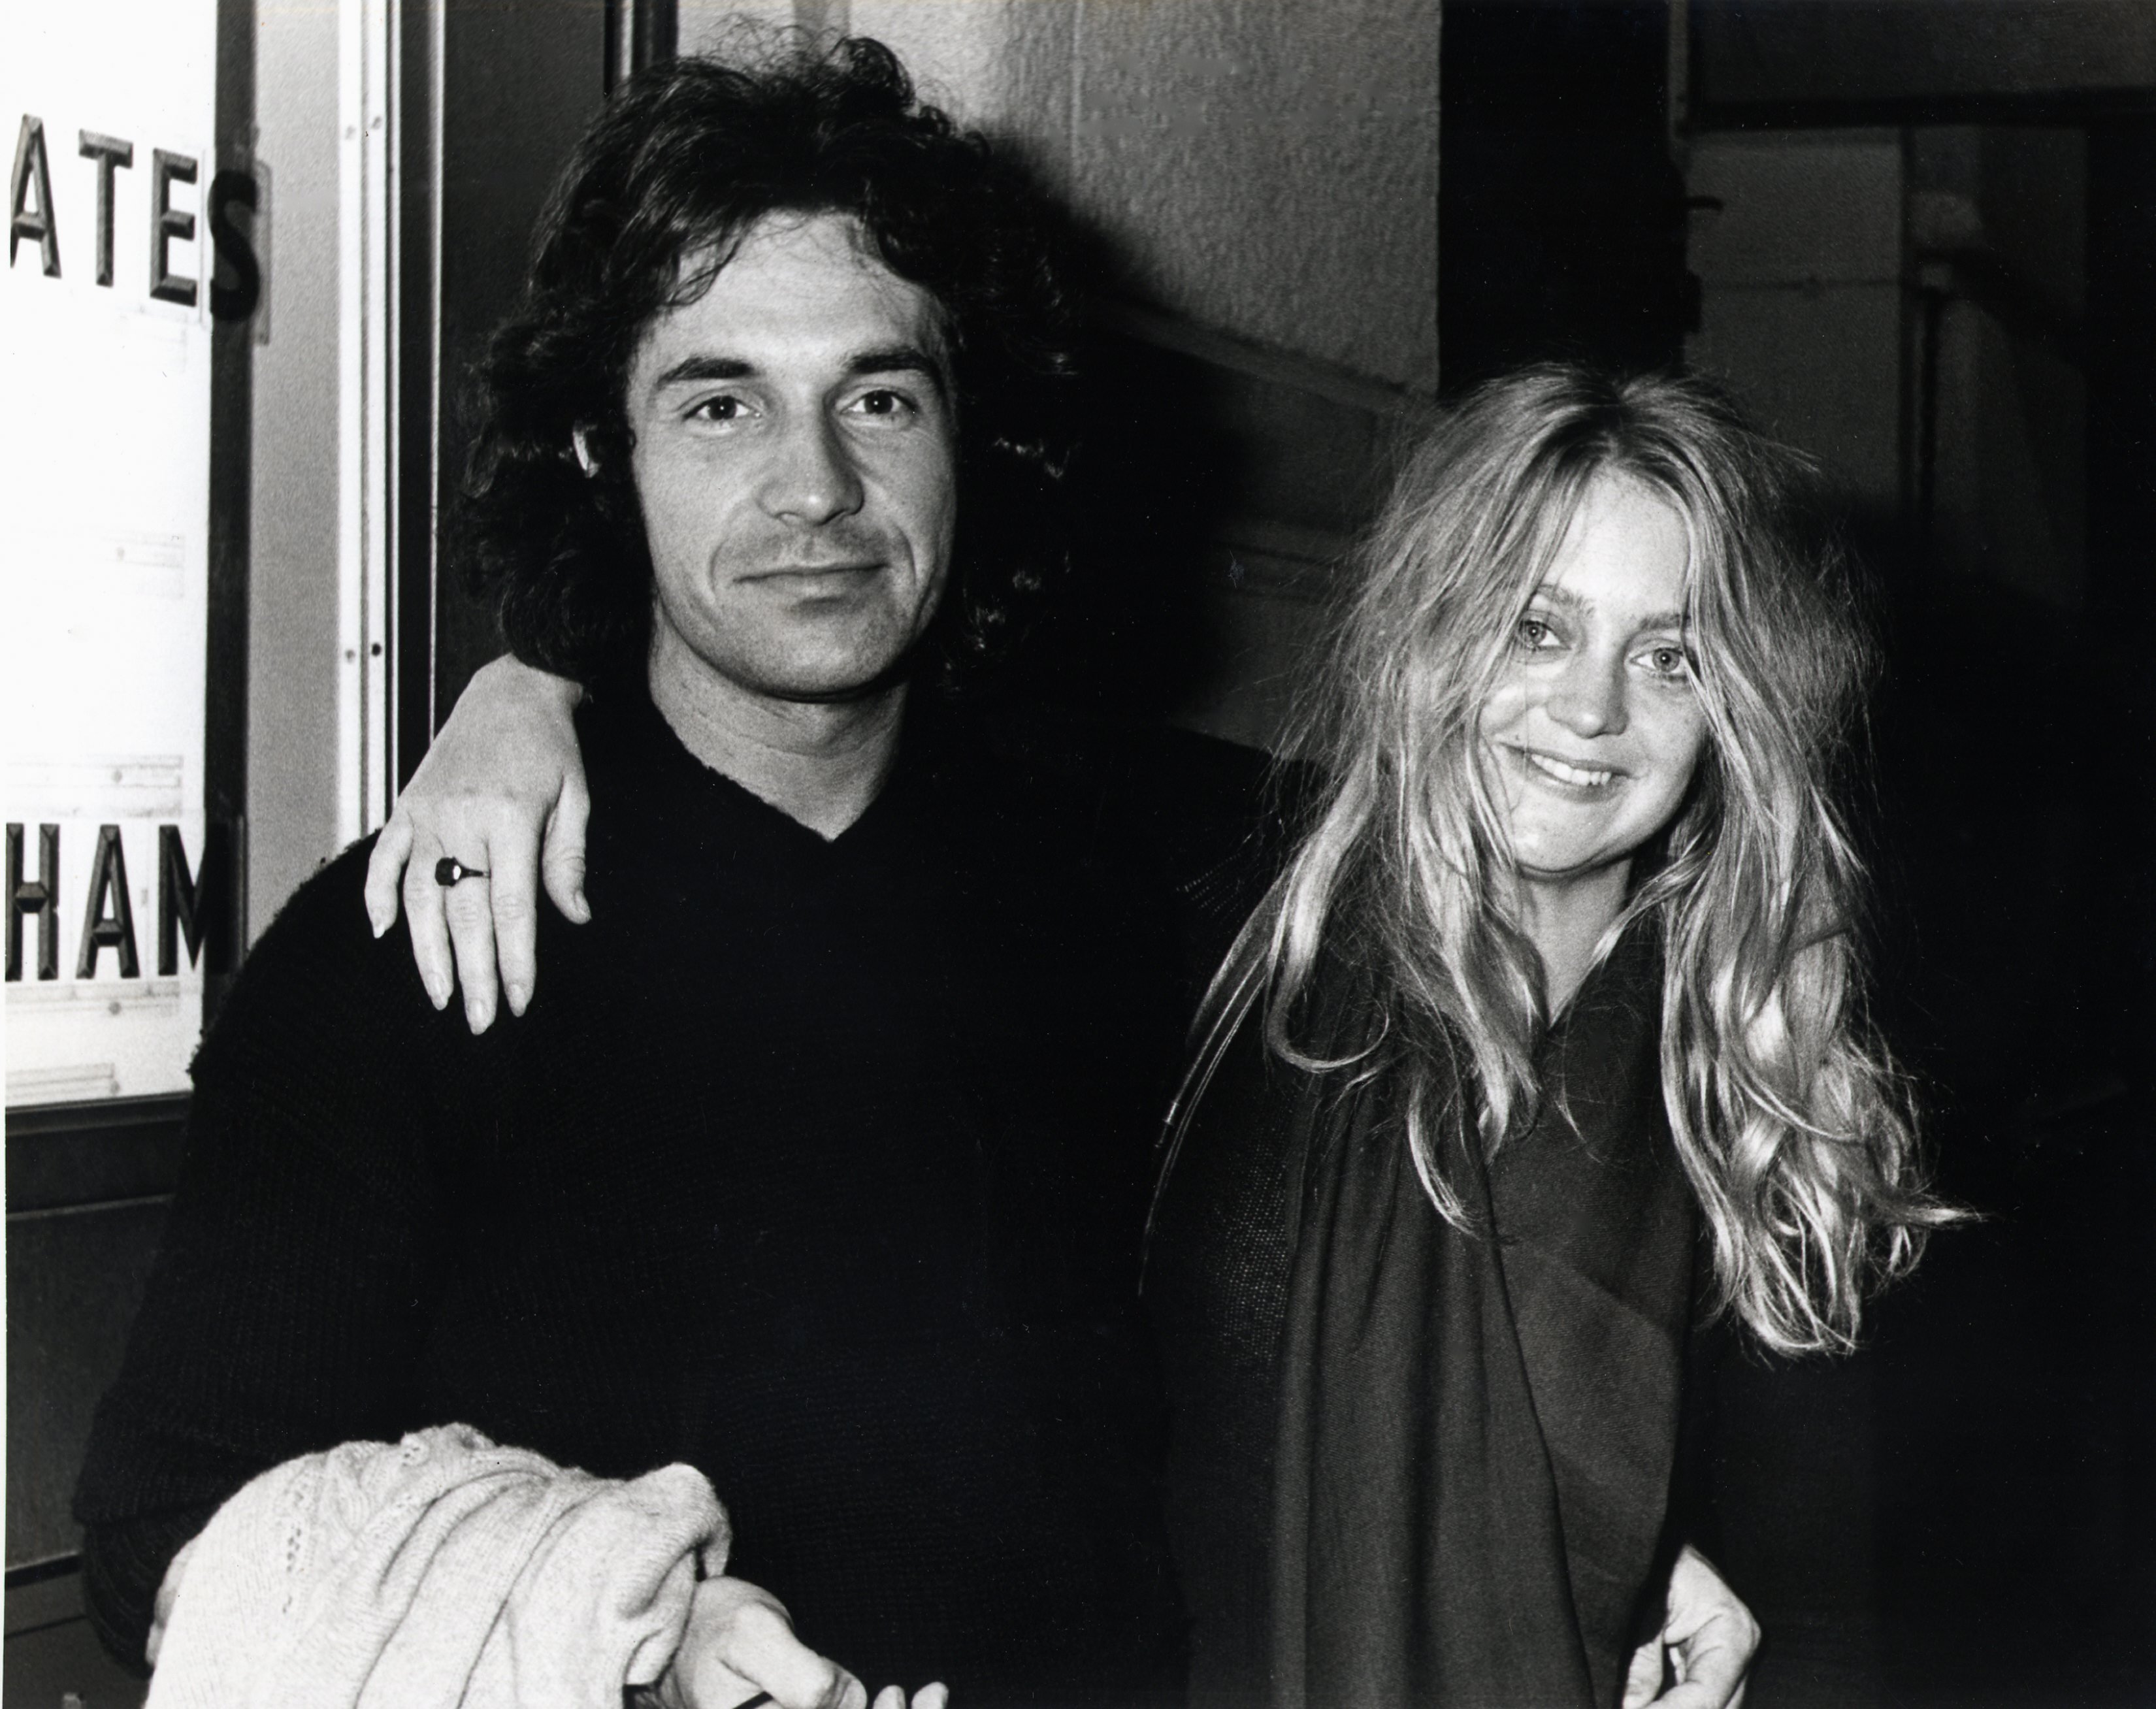 Musician Bill Hudson pictured with his wife, actress Goldie Hawn on November 20, 1976 ┃Source: Getty Images